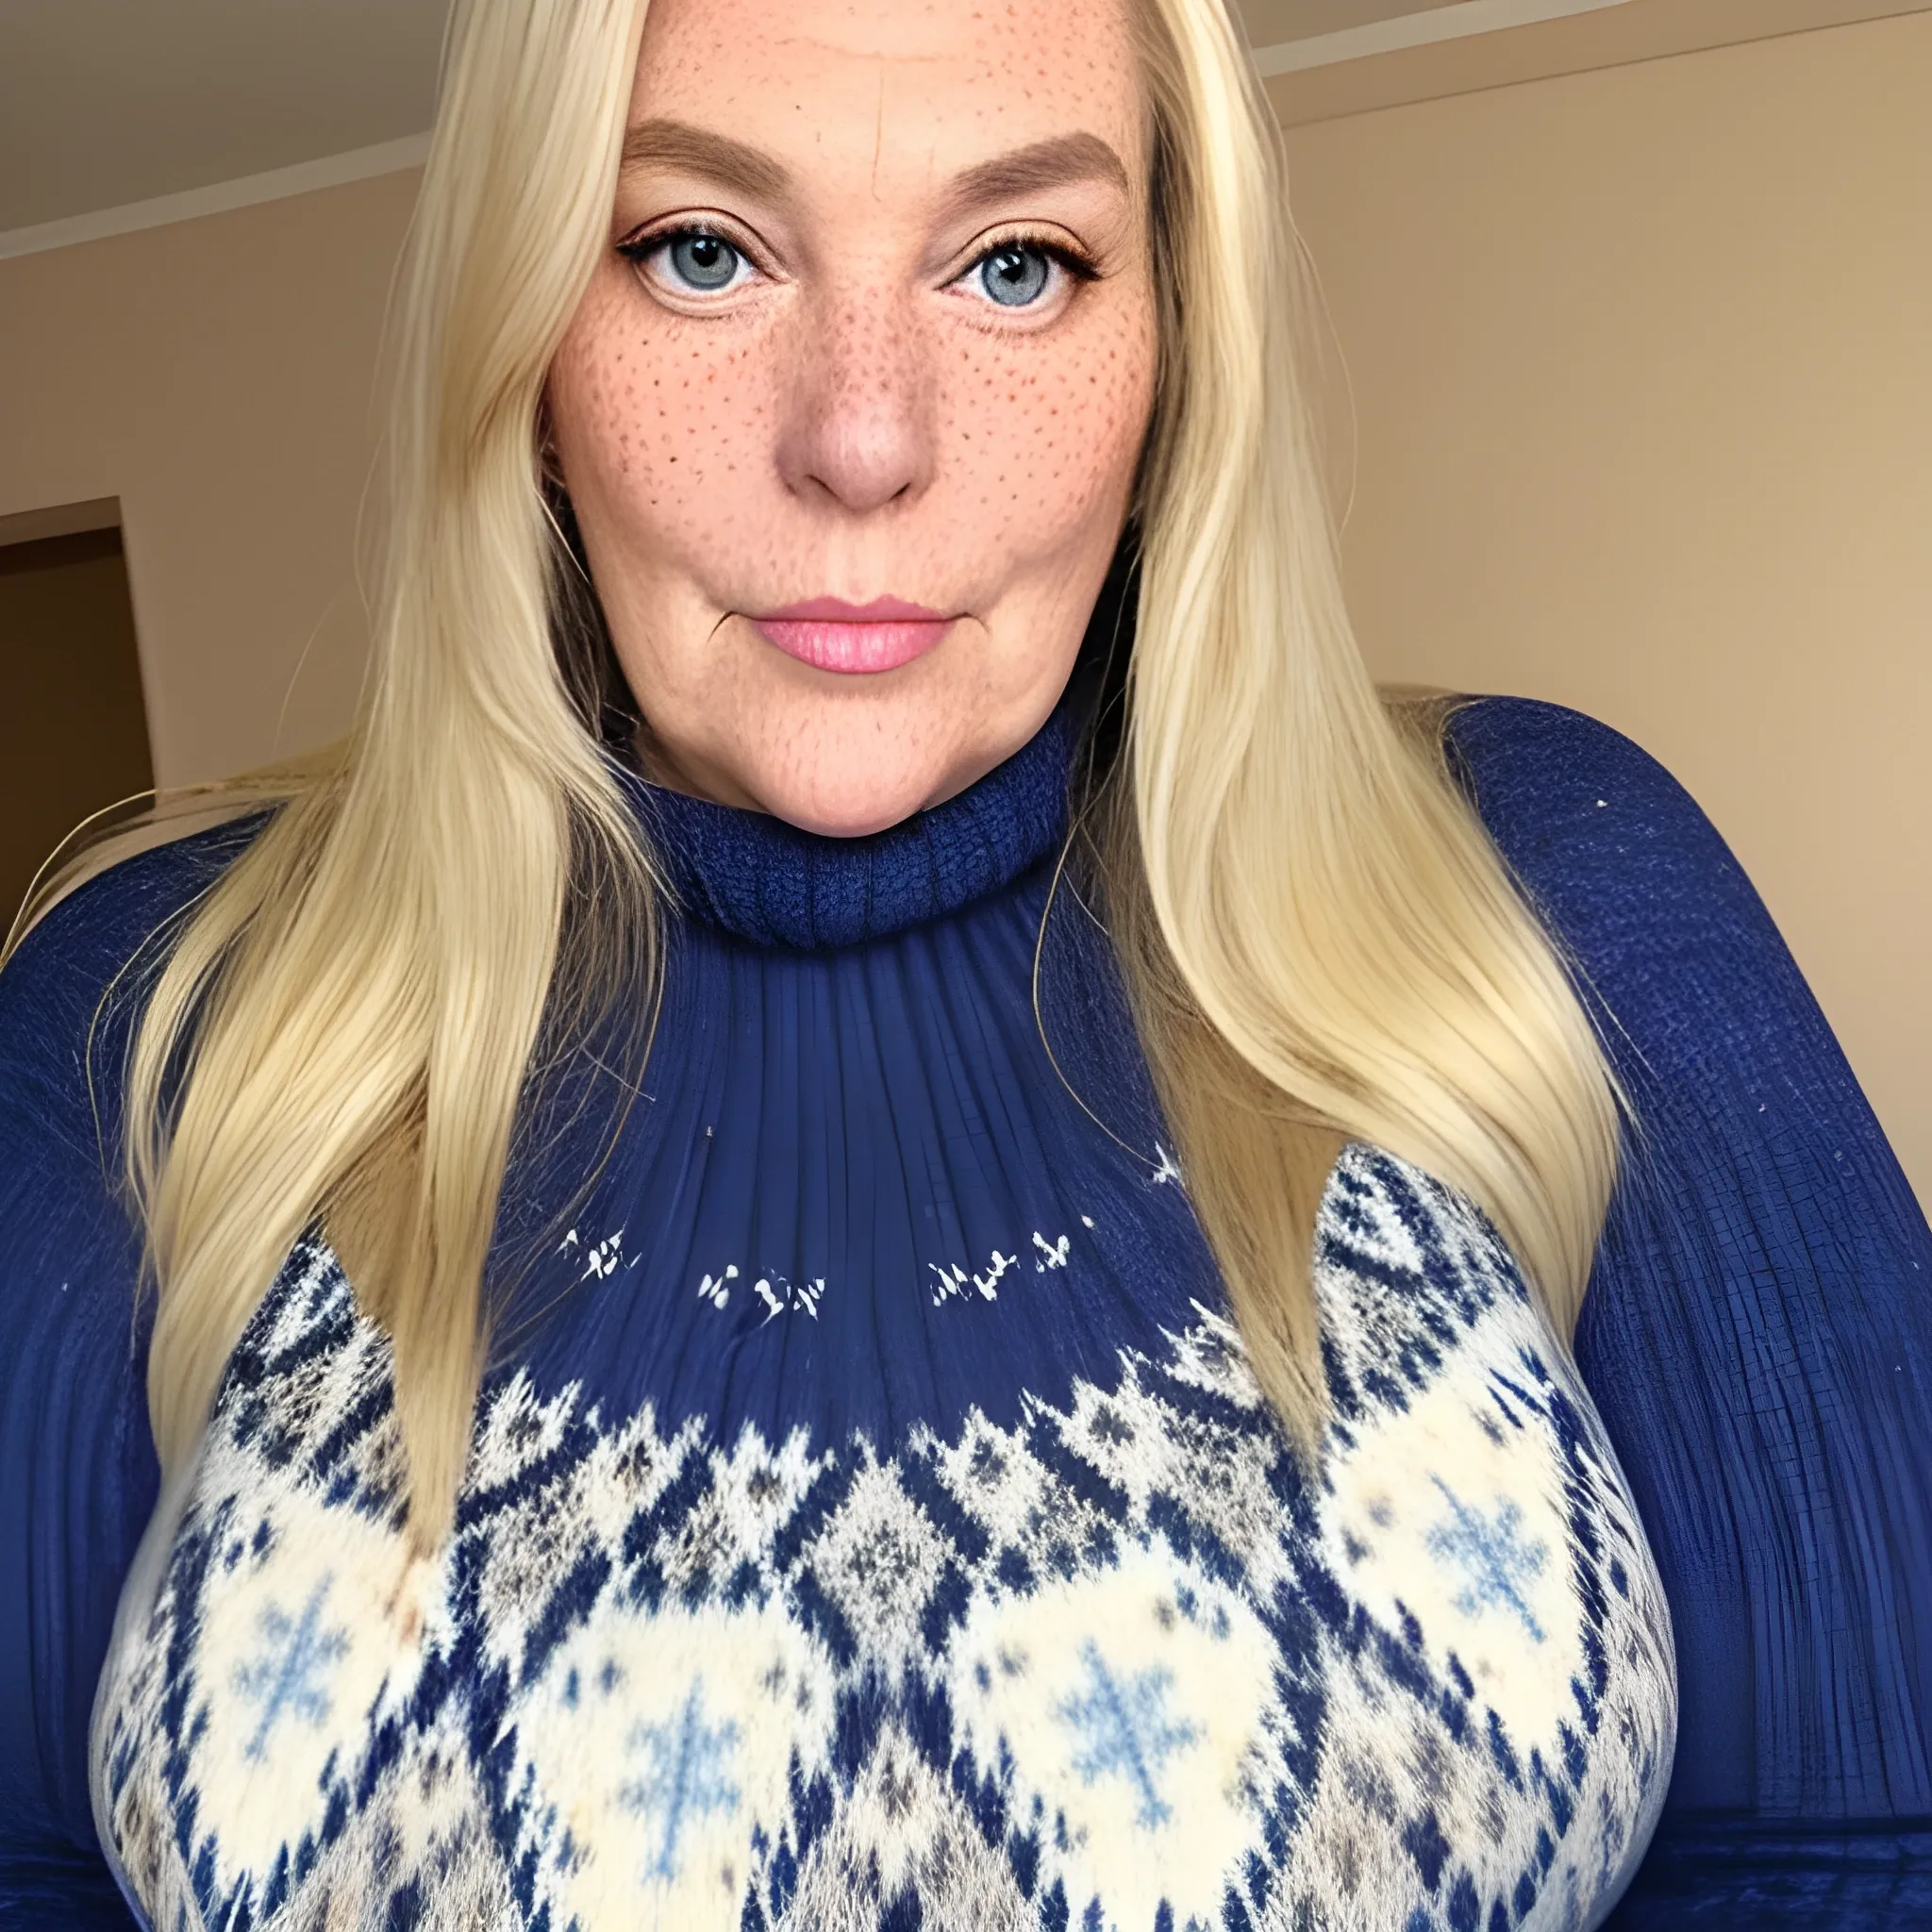 Tall beautiful plus-sized, ample, buxom, early middle-aged American Woman, long straight blonde hair, full lips, full face, freckles, blue patterned sweater, looking down at the camera, up close pov, detailed 